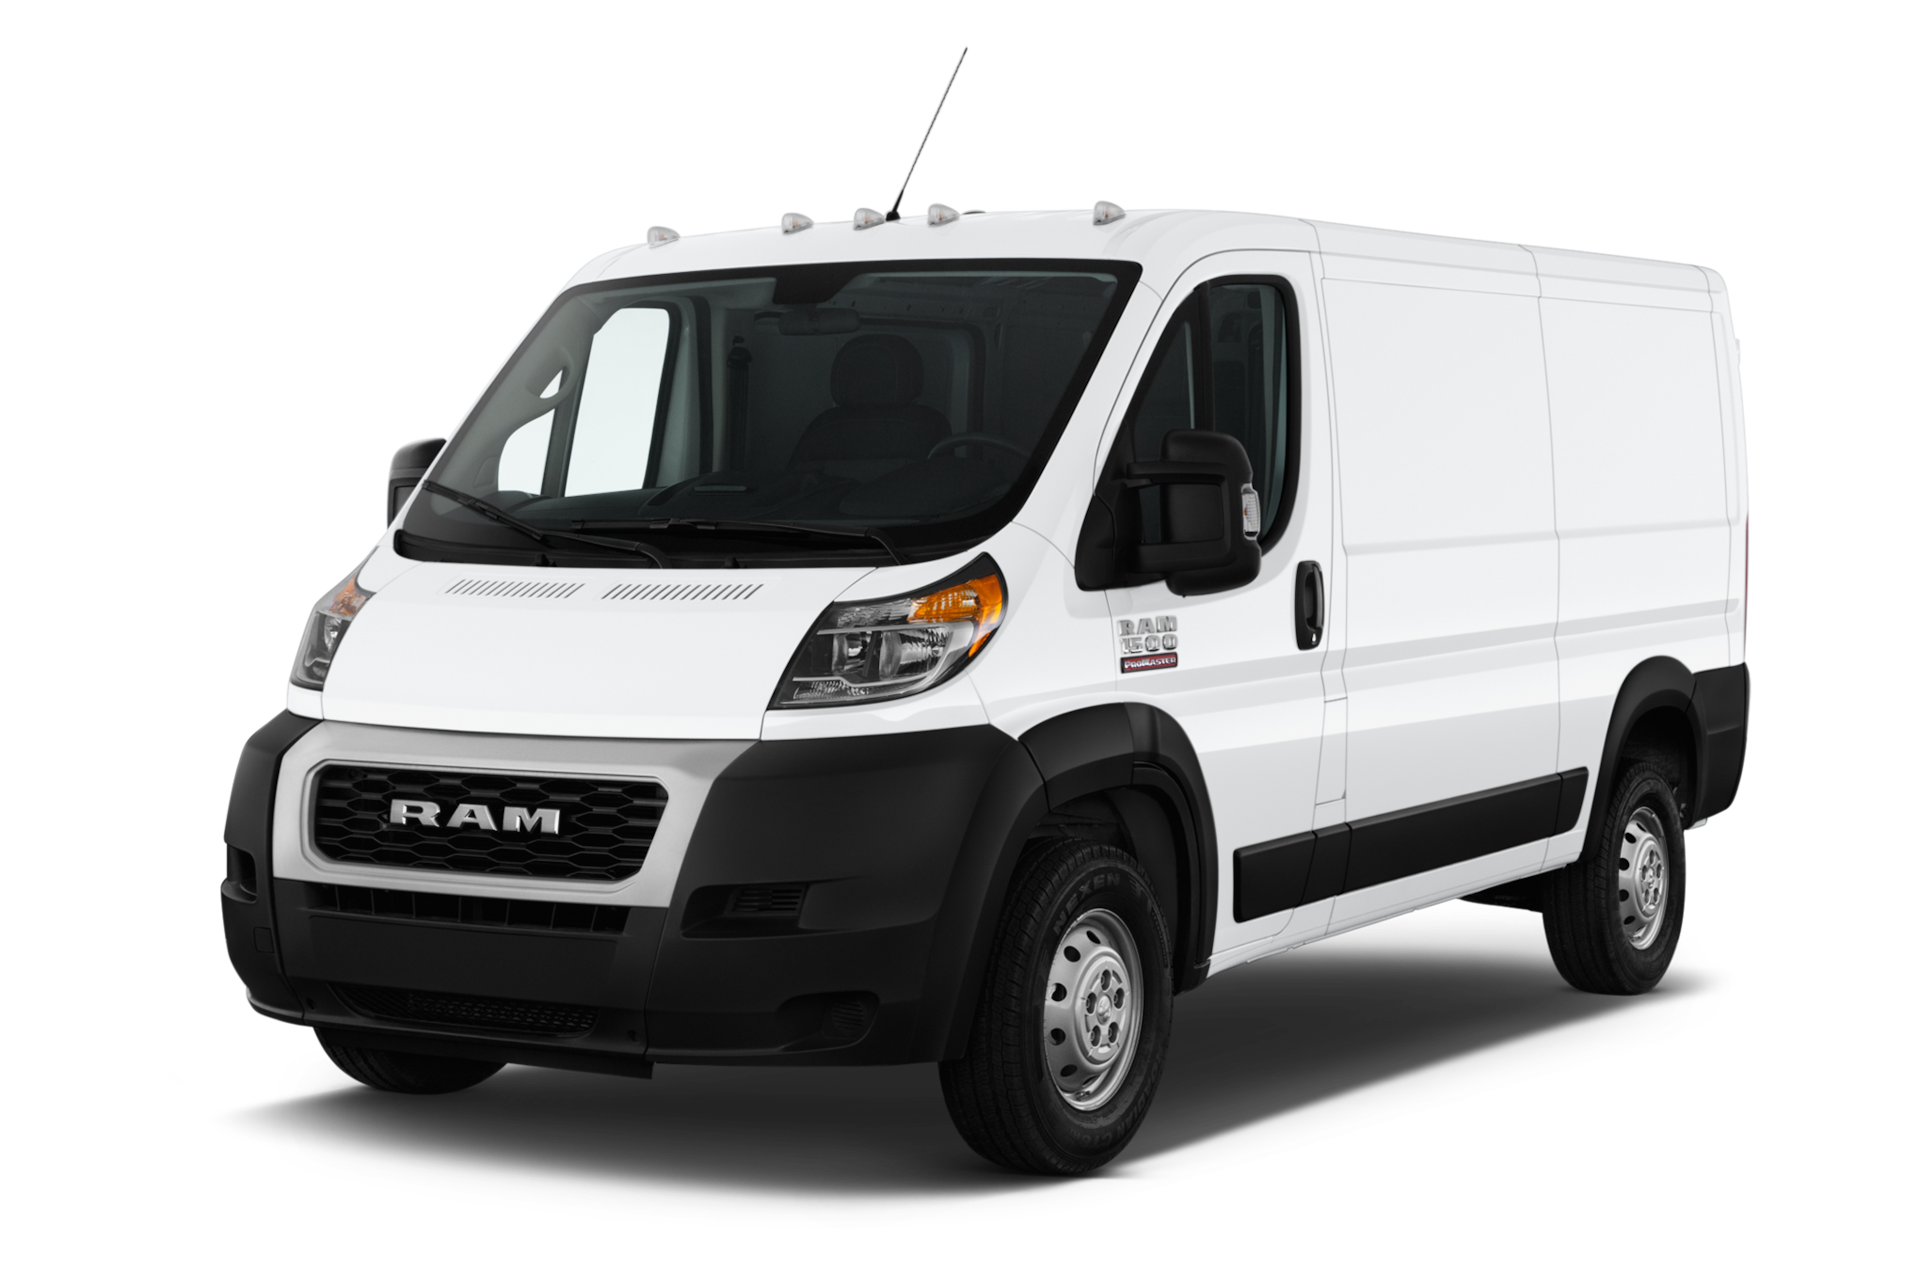 2020 Ram ProMaster Prices, Reviews, and Photos - MotorTrend